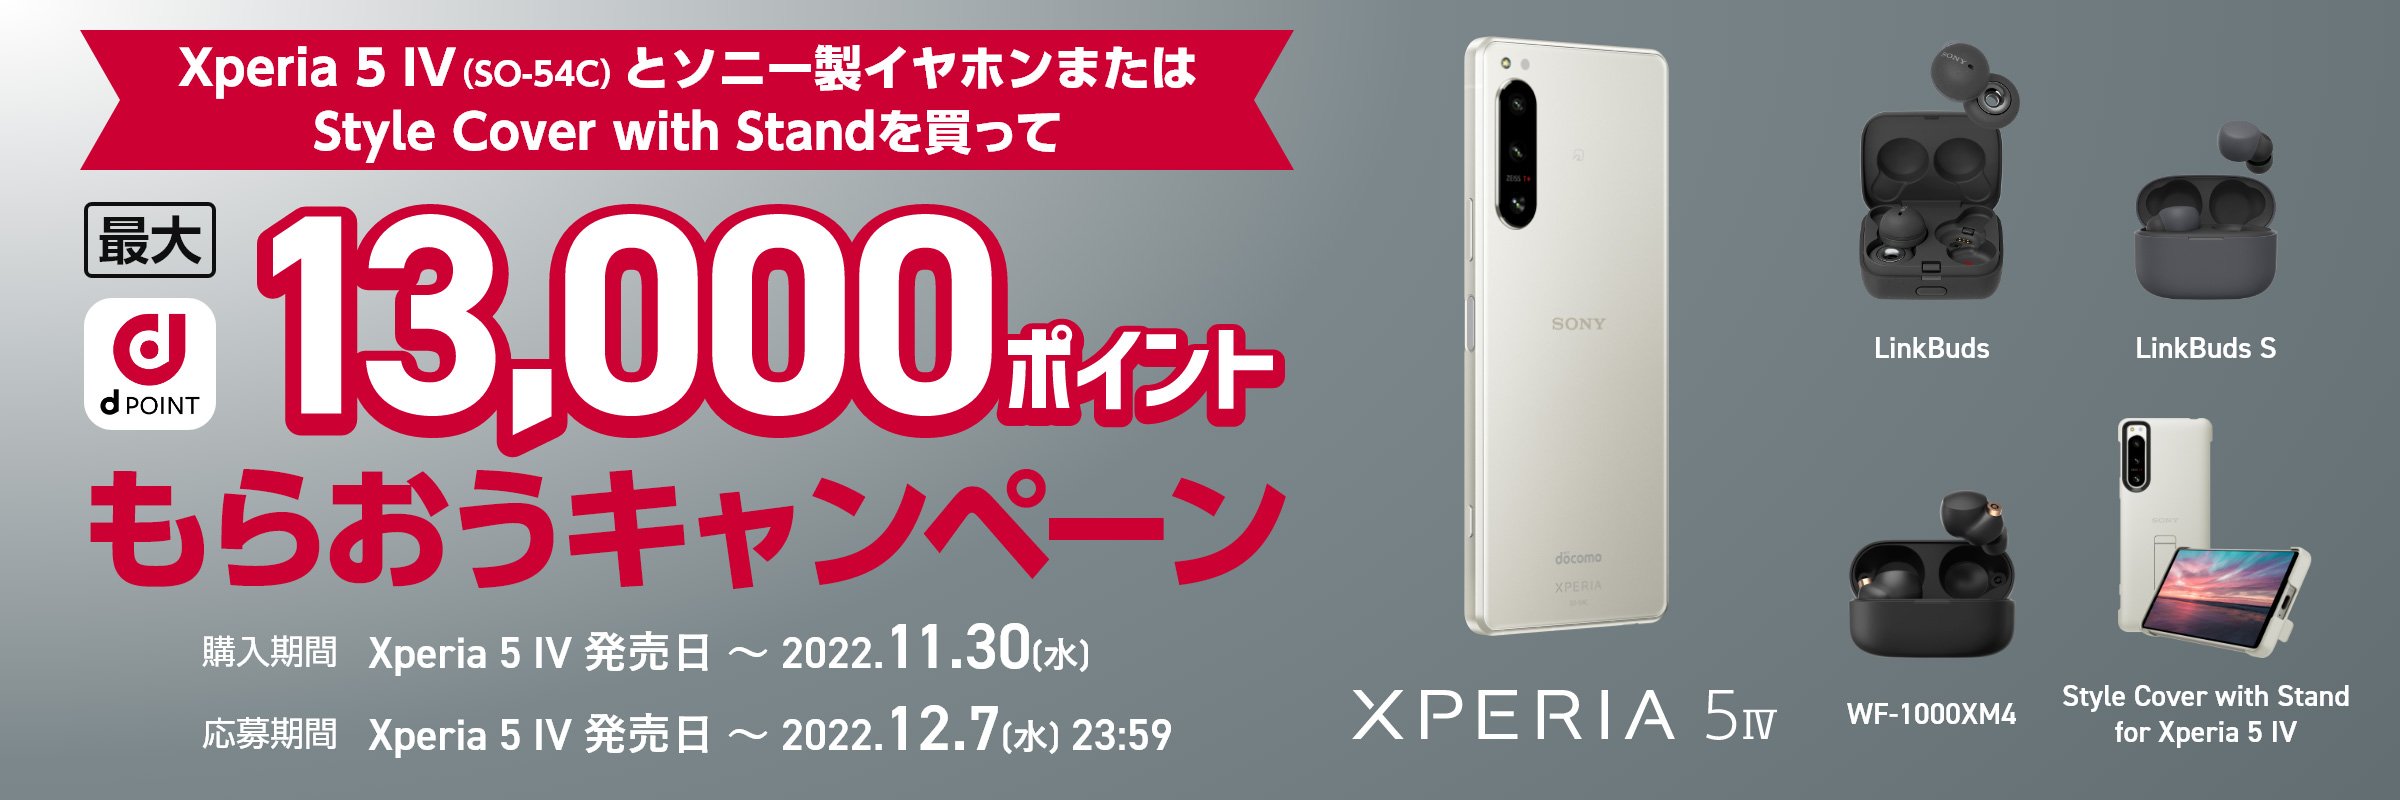 Xperia 5 IV (SO-54C)とソニー製イヤホンまたはStyle Cover with Standを買って最大13,000dポイントもらおうキャンペーン 購入期間：Xperia 5 IV 発売日～2022.11.30(水) 応募期間：Xperia 5 IV 発売日～2022.12.7(水)23:59